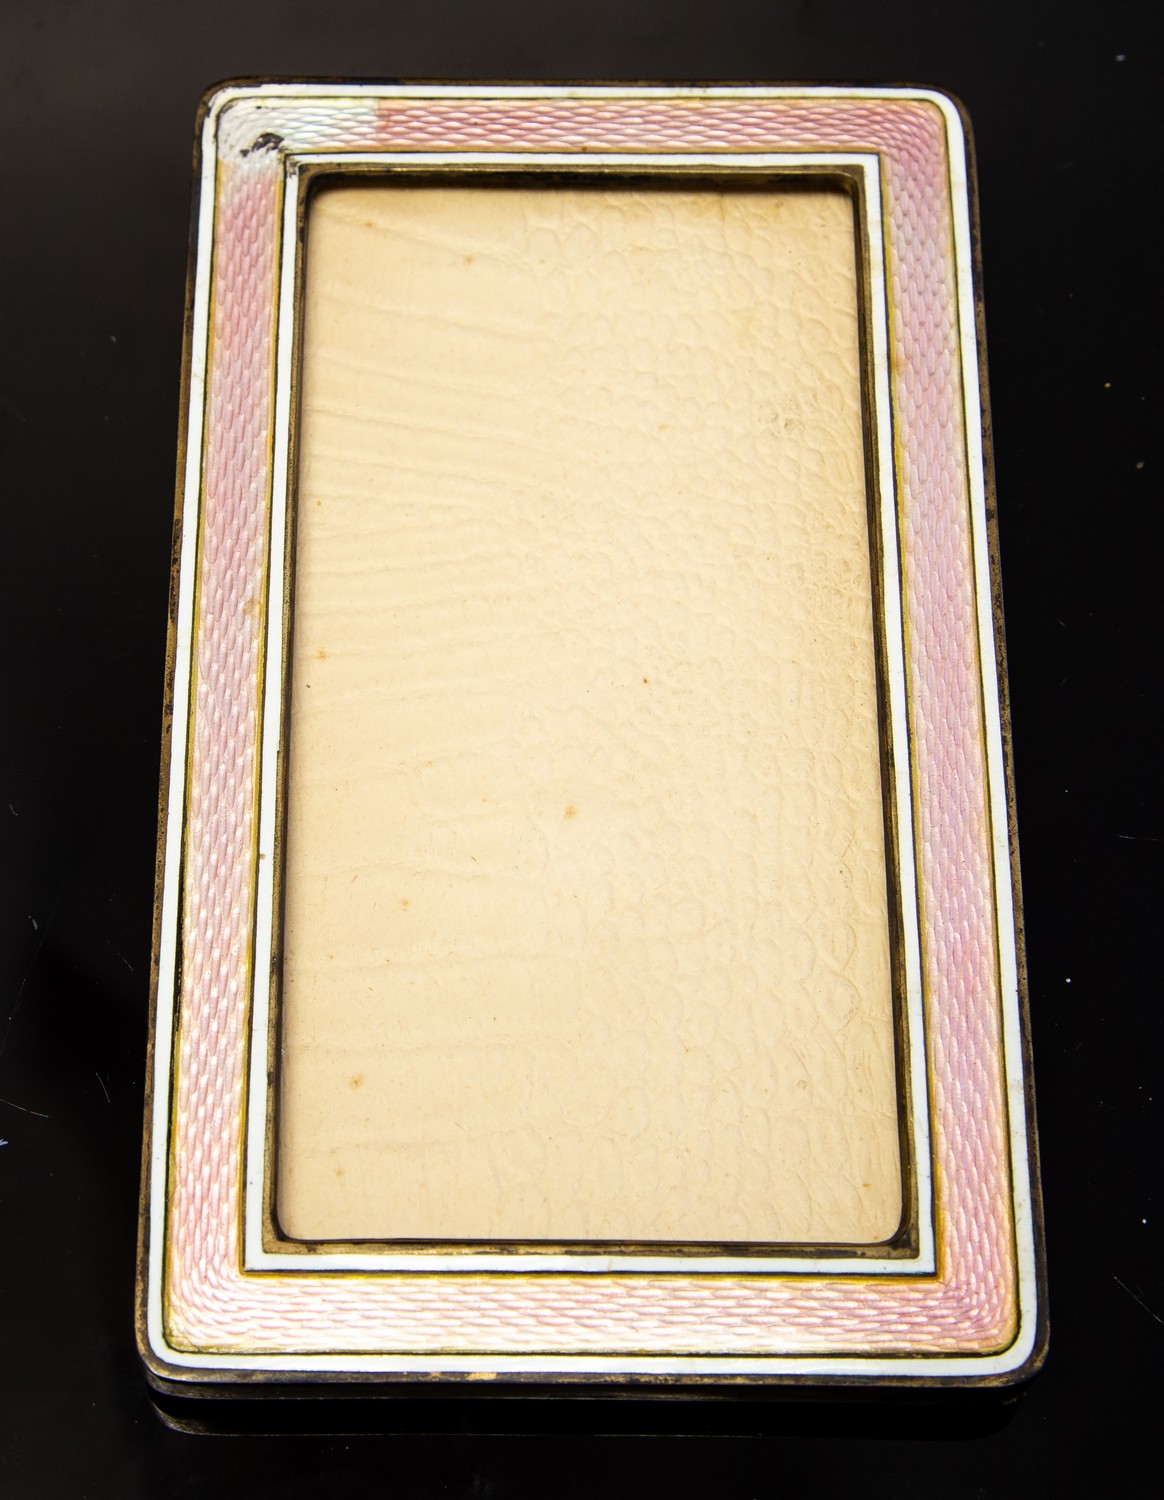 An enamelled photograph frame, pink guilloche enamel within white stripes, 13.